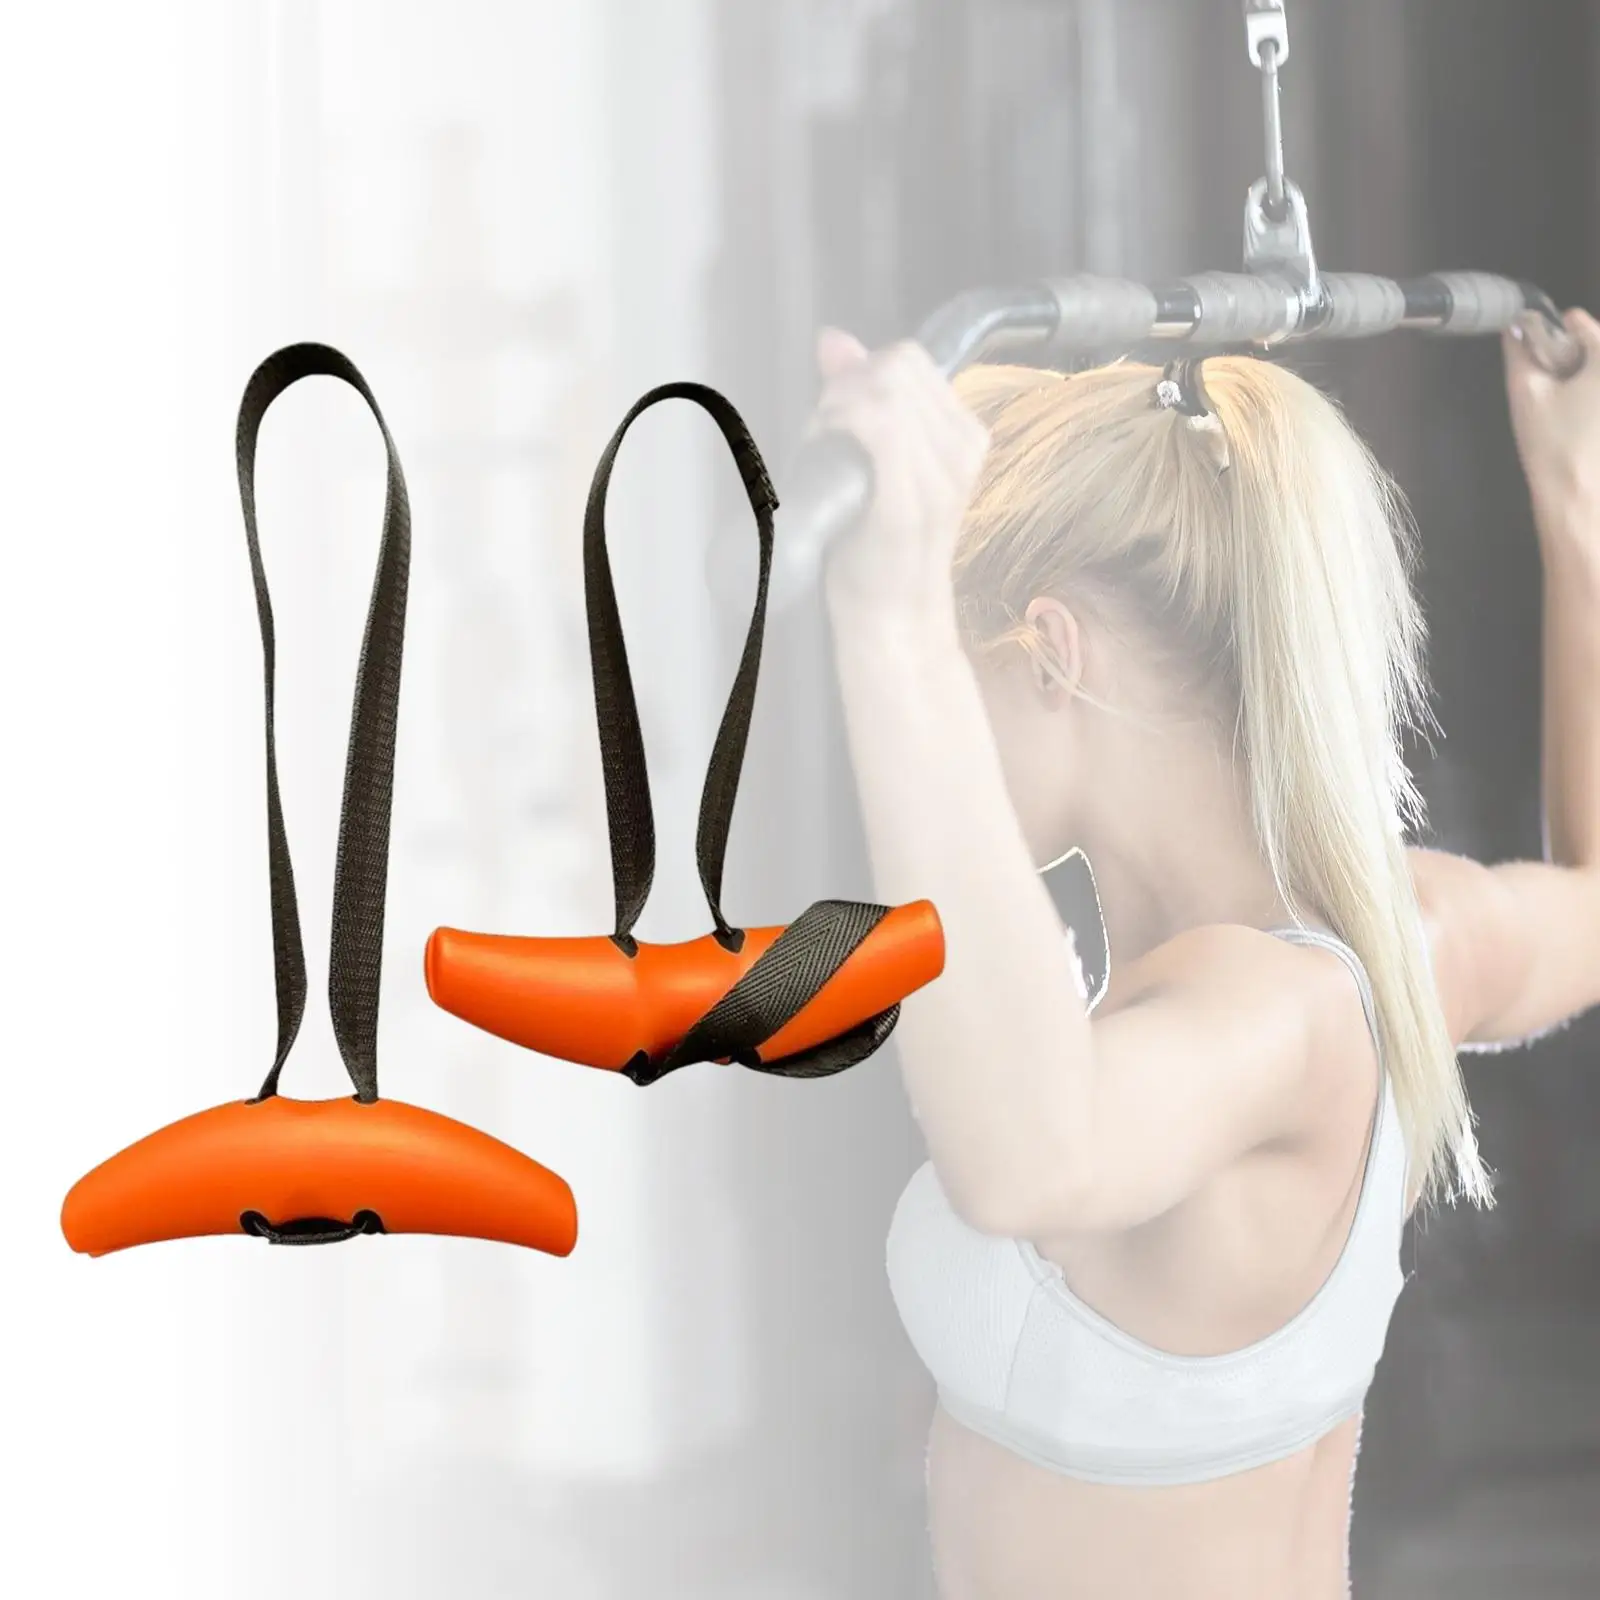 2x Pull up Bar Handles Weightlifting Grips Grips Resistance Band Handles Attachment Nylon Heavy Duty for Dumbbell Home Fitness